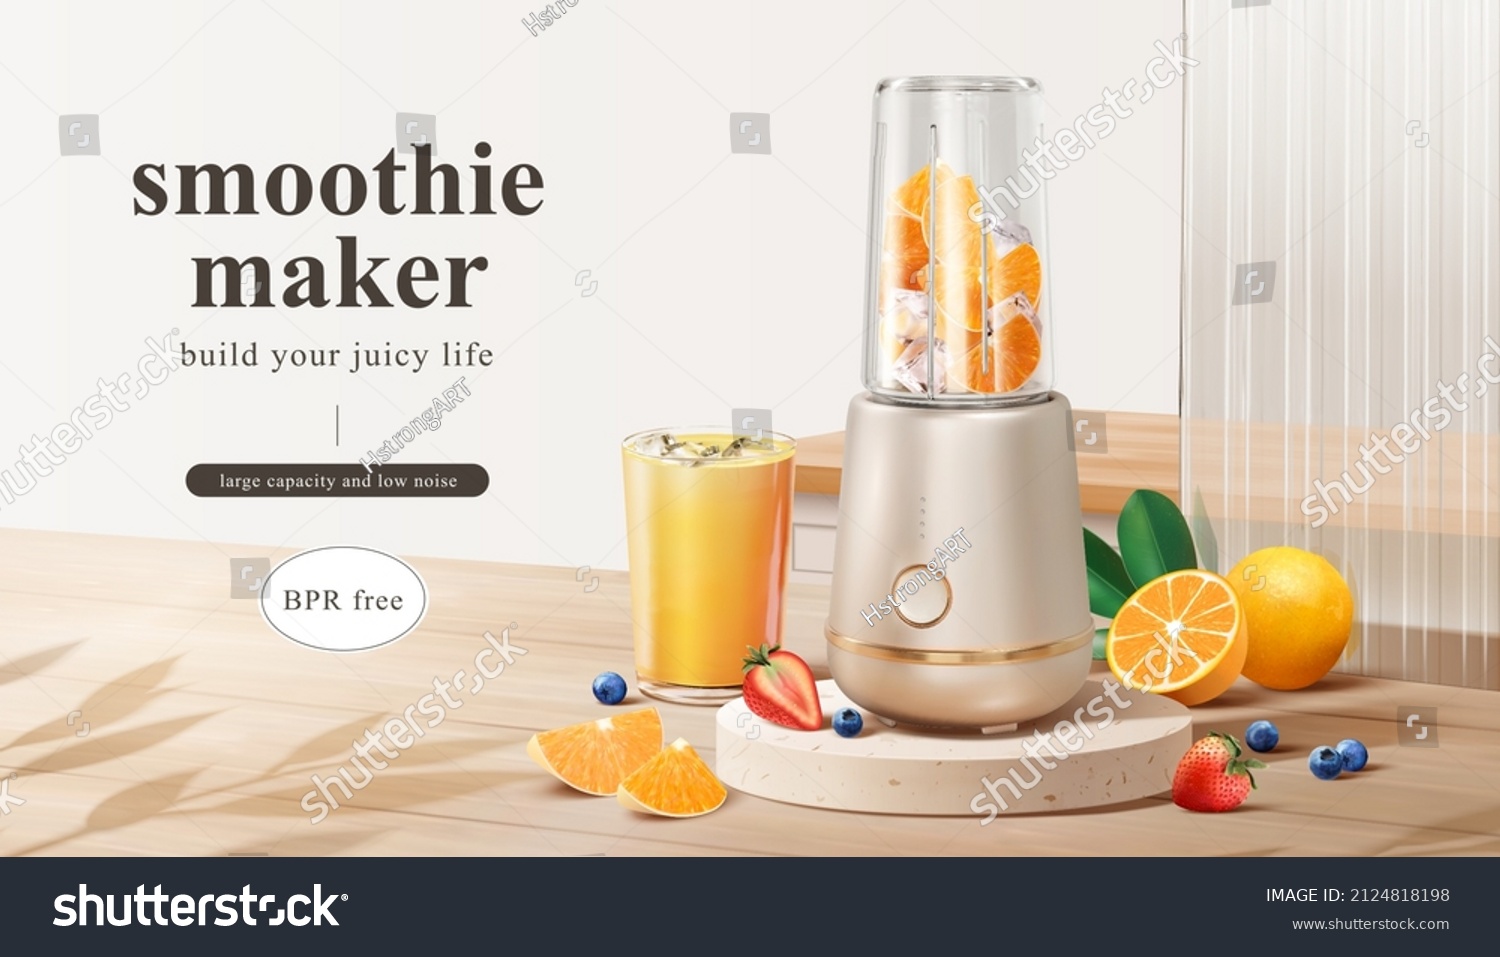 Smoothie maker ad template. Household appliance mock-up full of fresh sliced fruits and ice on wooden kitchen countertop. 3d illustration. #2124818198